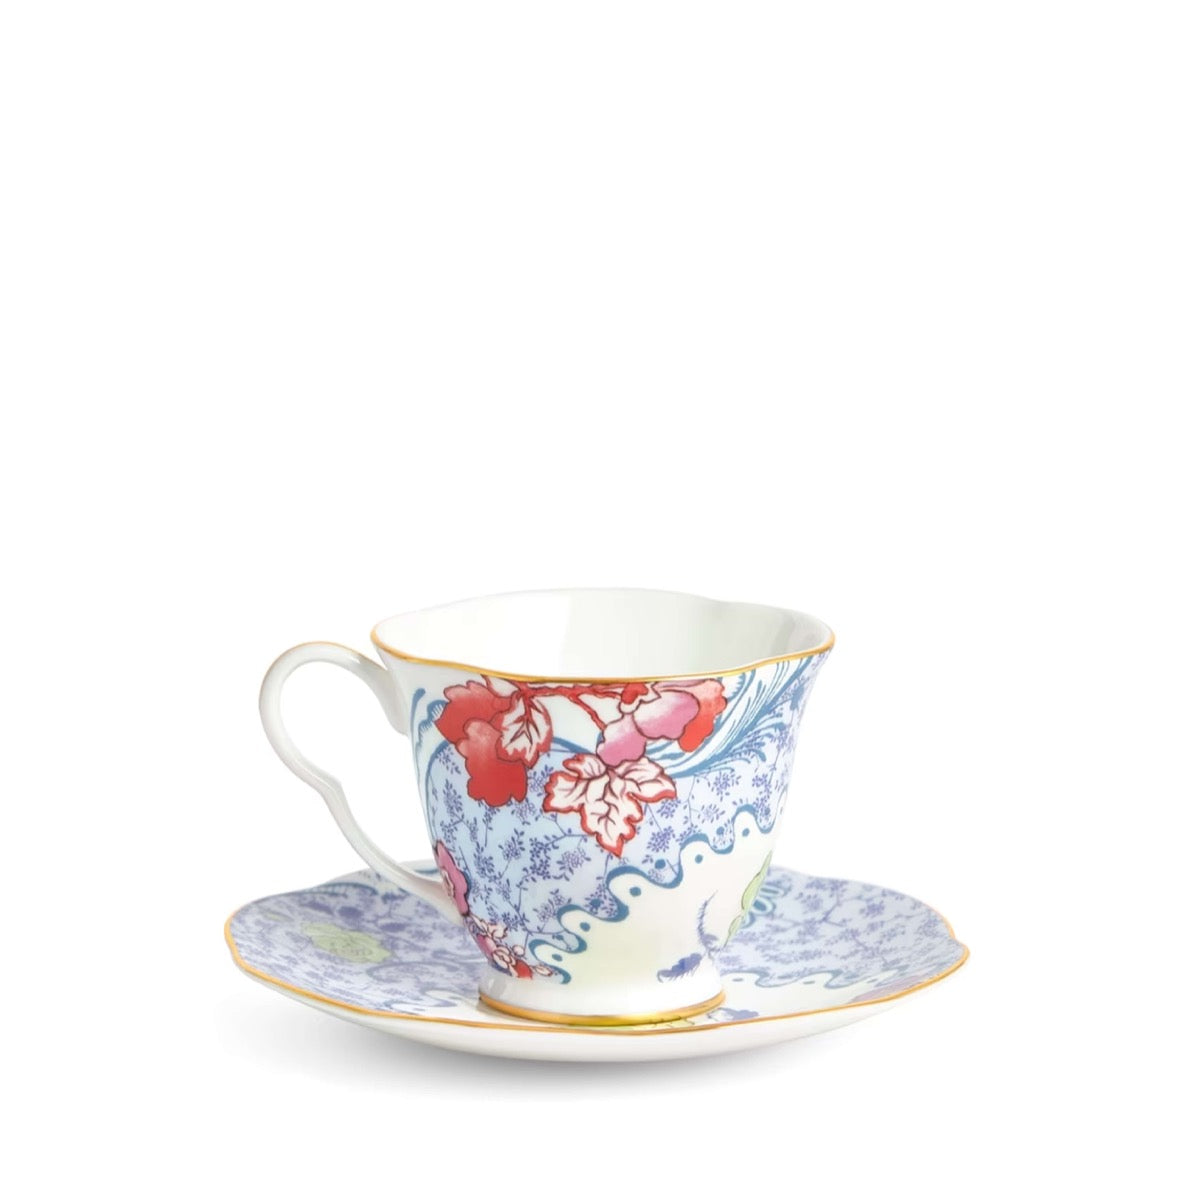 Wedgwood butterfly bloom blue and pink teacup and saucer sale